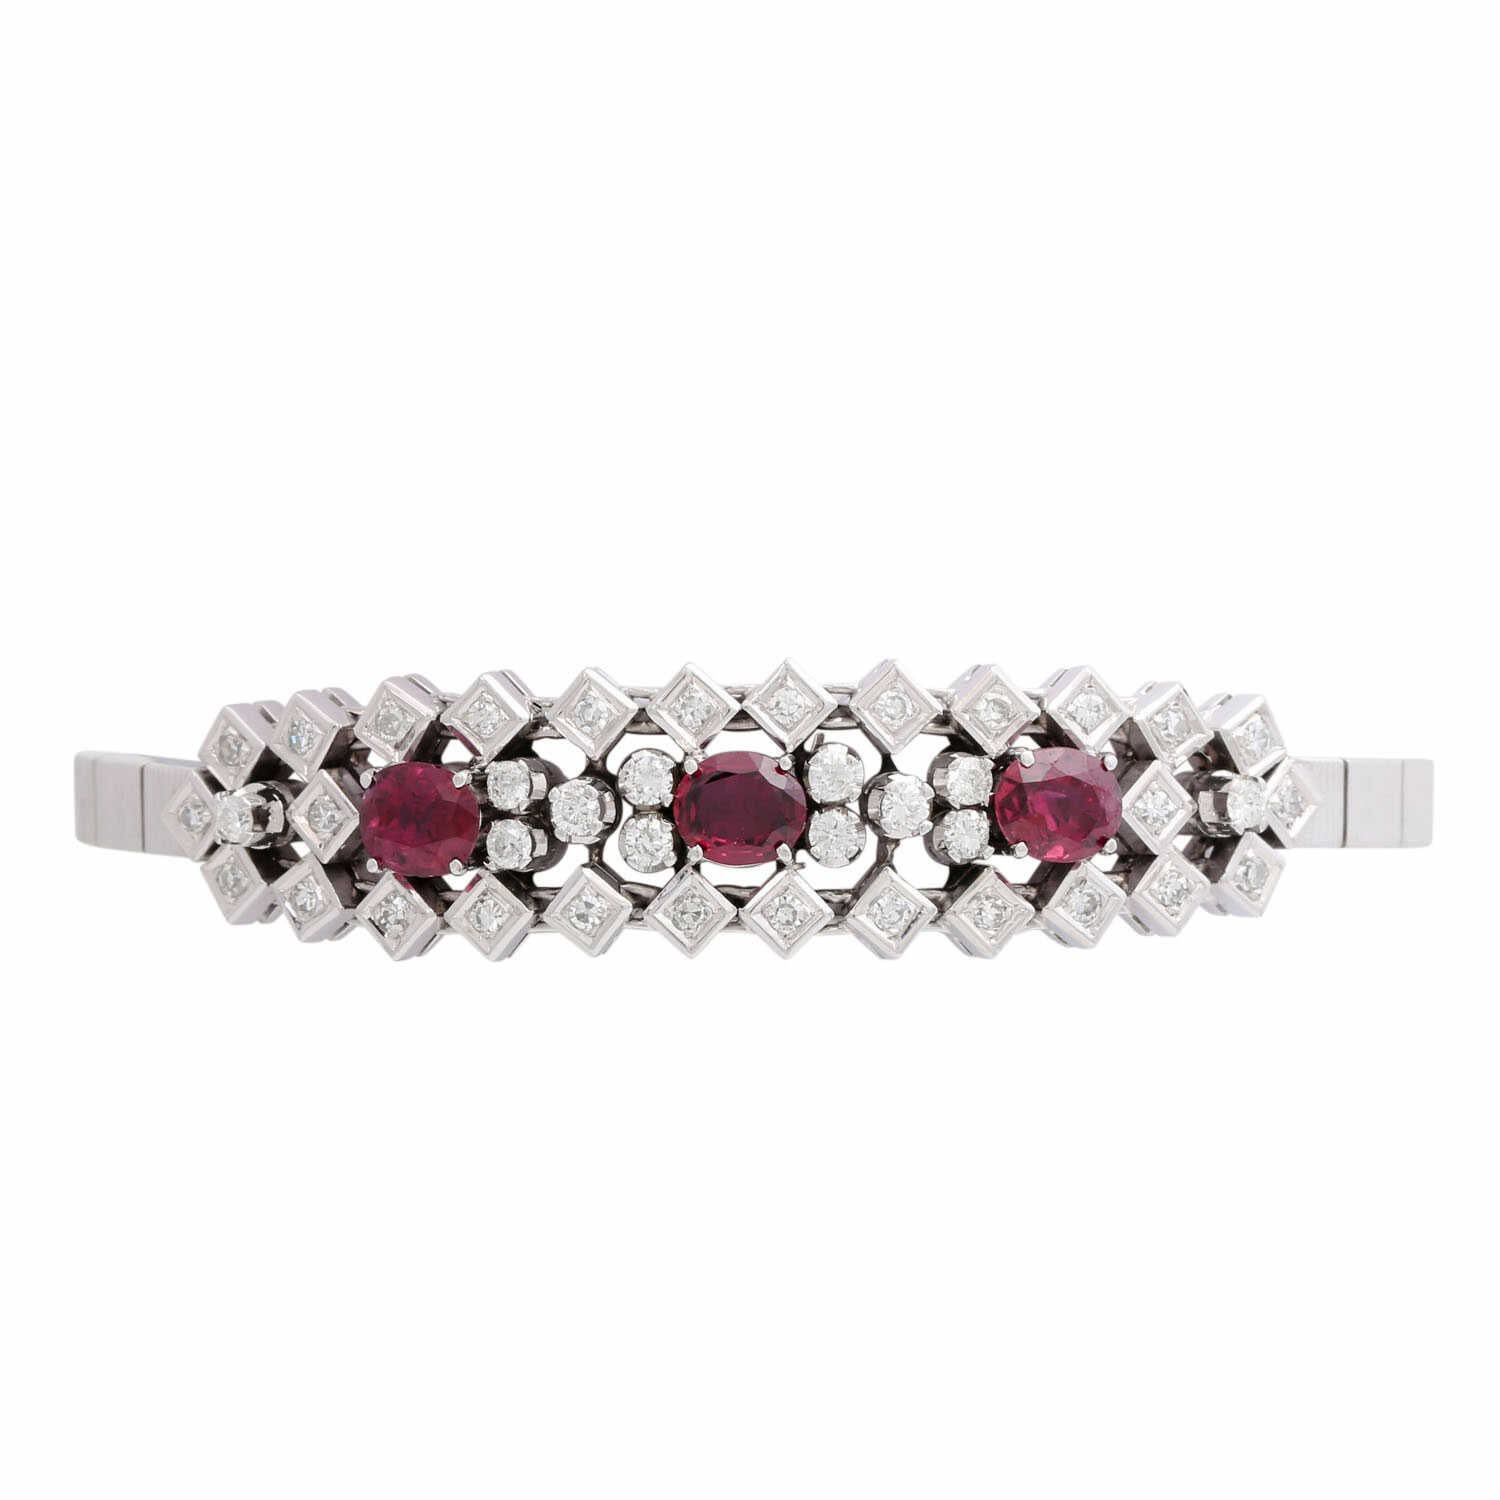 Bracelet with 3 fine rubies comp. approx. 2 ct and diamonds comp. approx. 0.9 ct